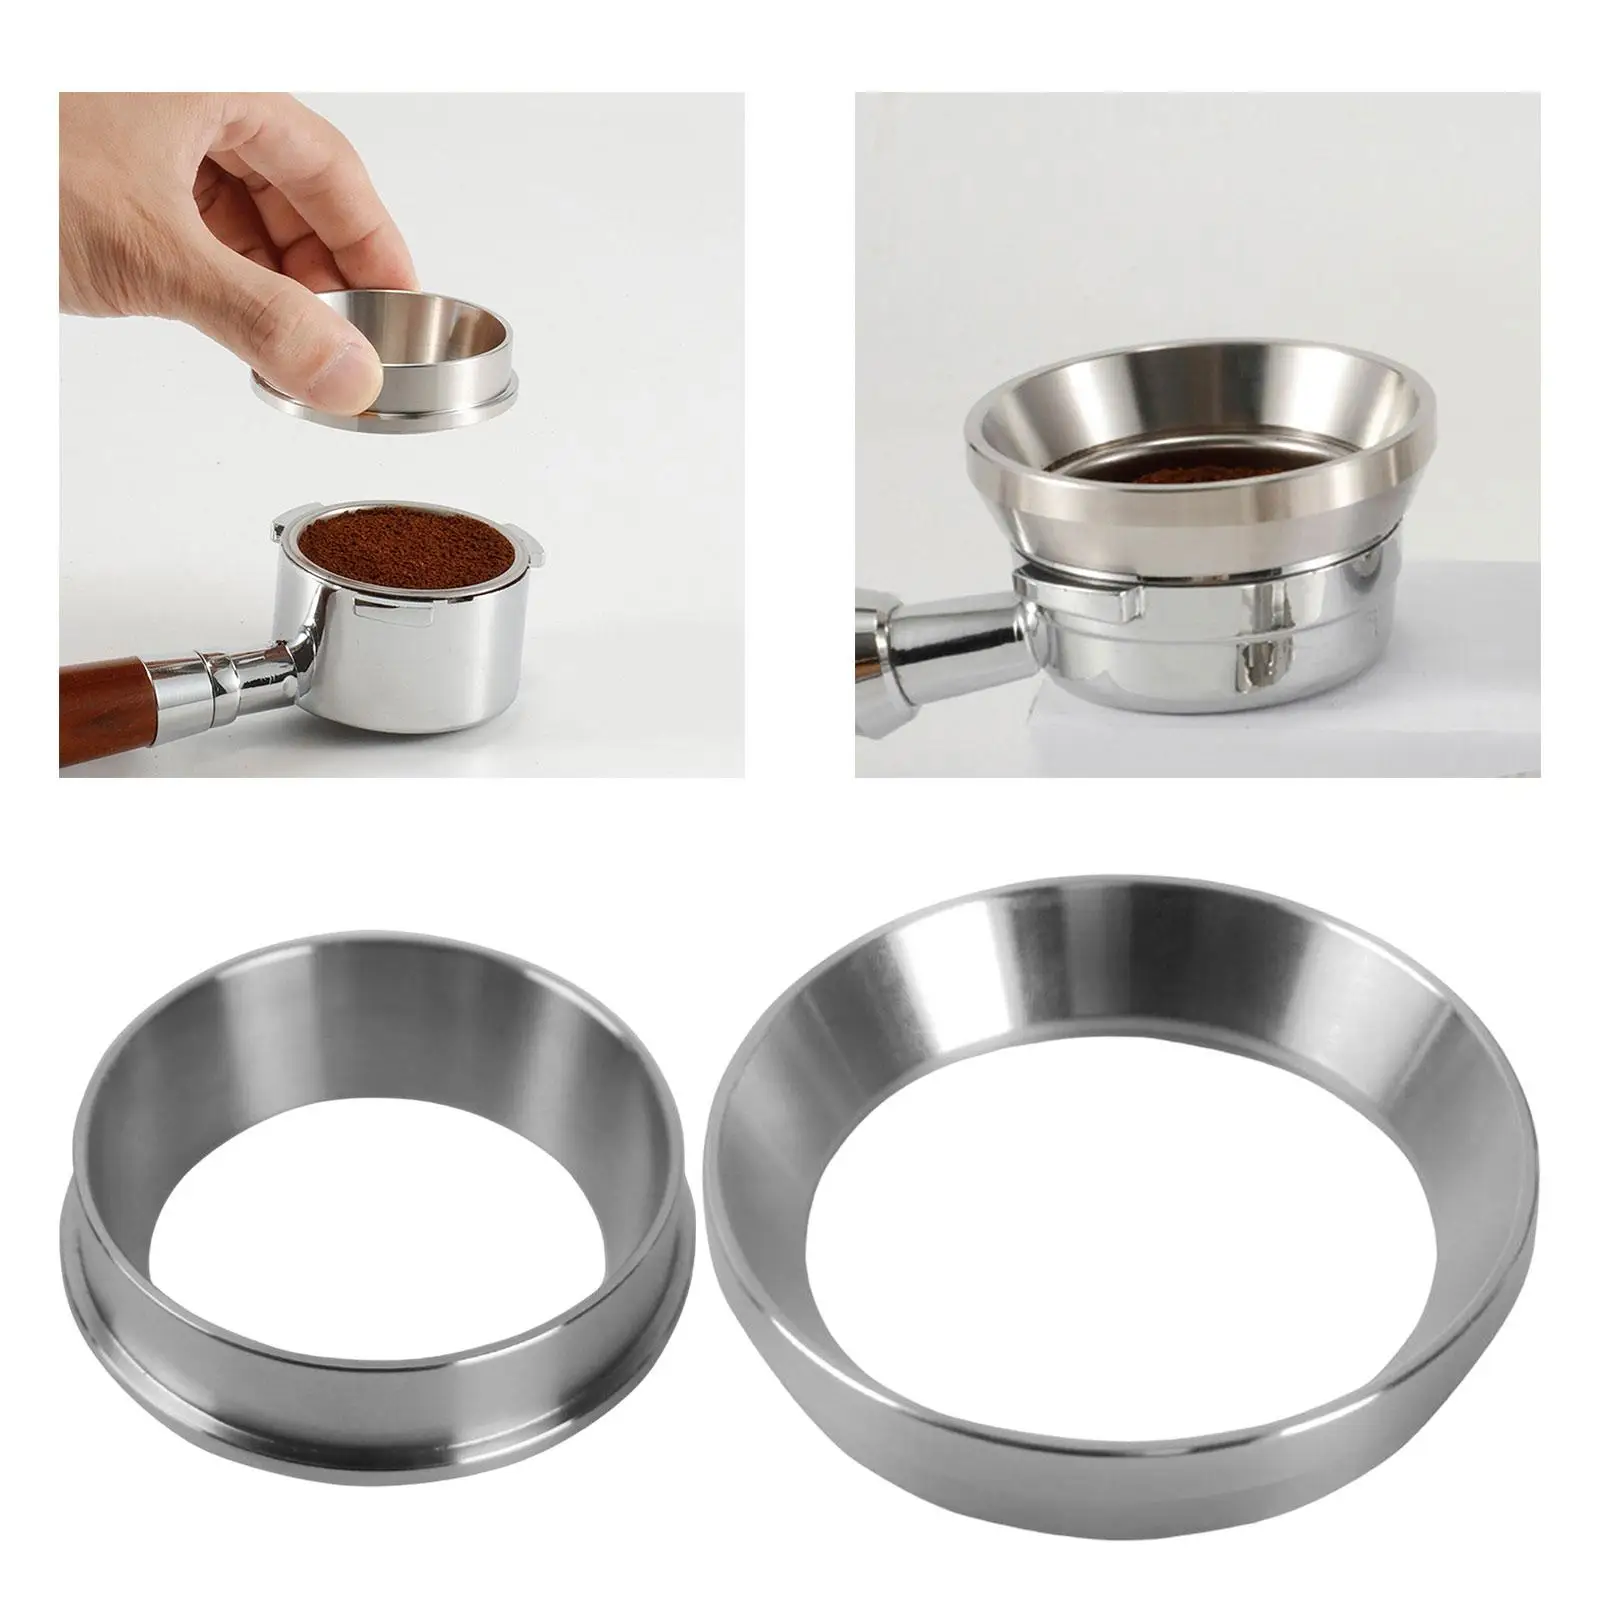 Coffee Dosing Ring 304 Stainless Steel Simple Design Avoid Powder from Spreading Durable Home Office Use Exquisite Lightweight